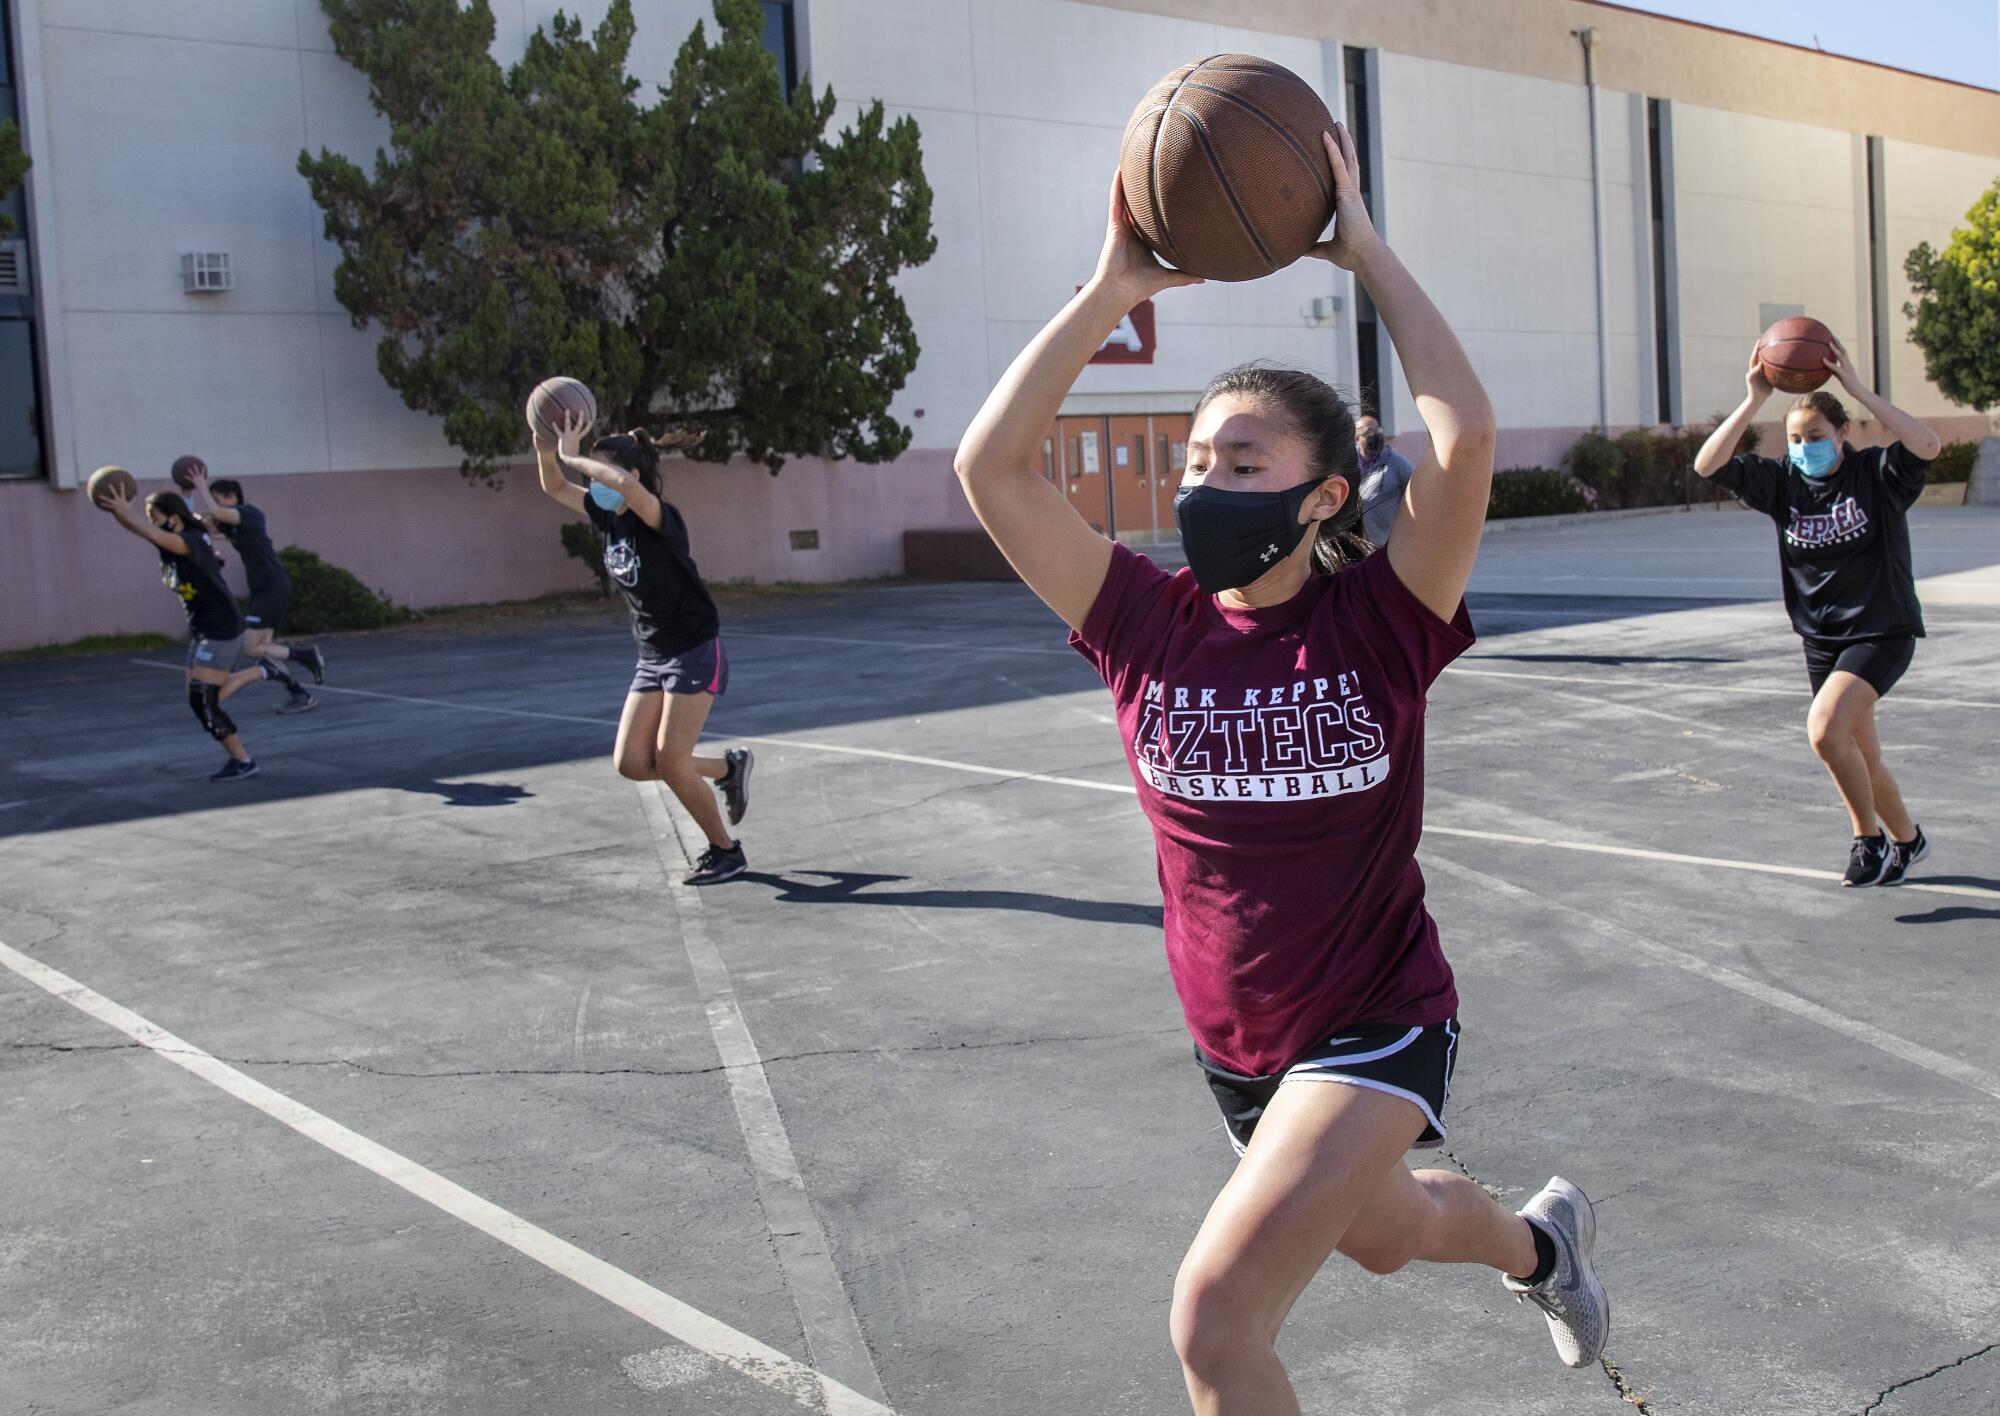 Kendall Tam, foreground, takes part in basketball drills with teammates on an outdoor court 